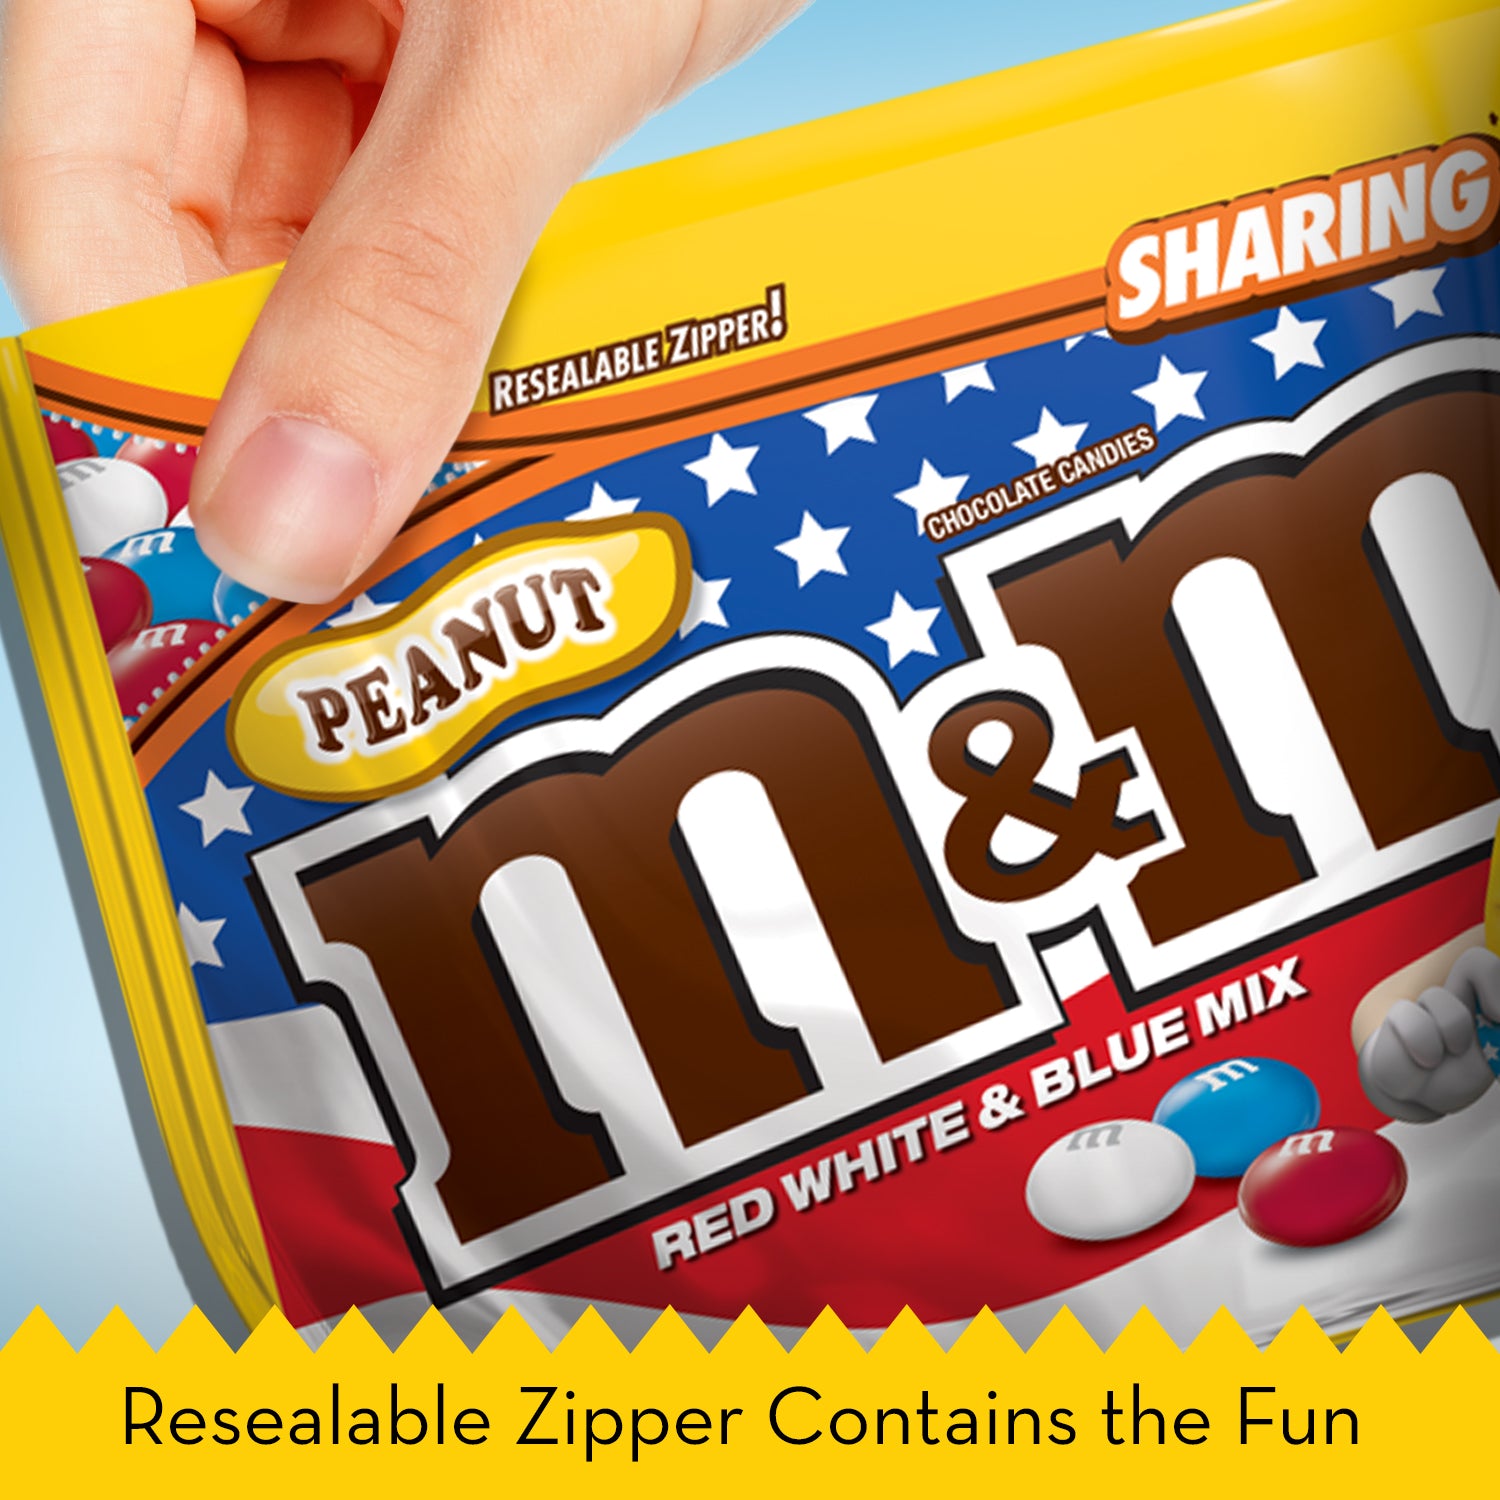 Save on M&M's Milk Chocolate Candies Red White & Blue Sharing Size